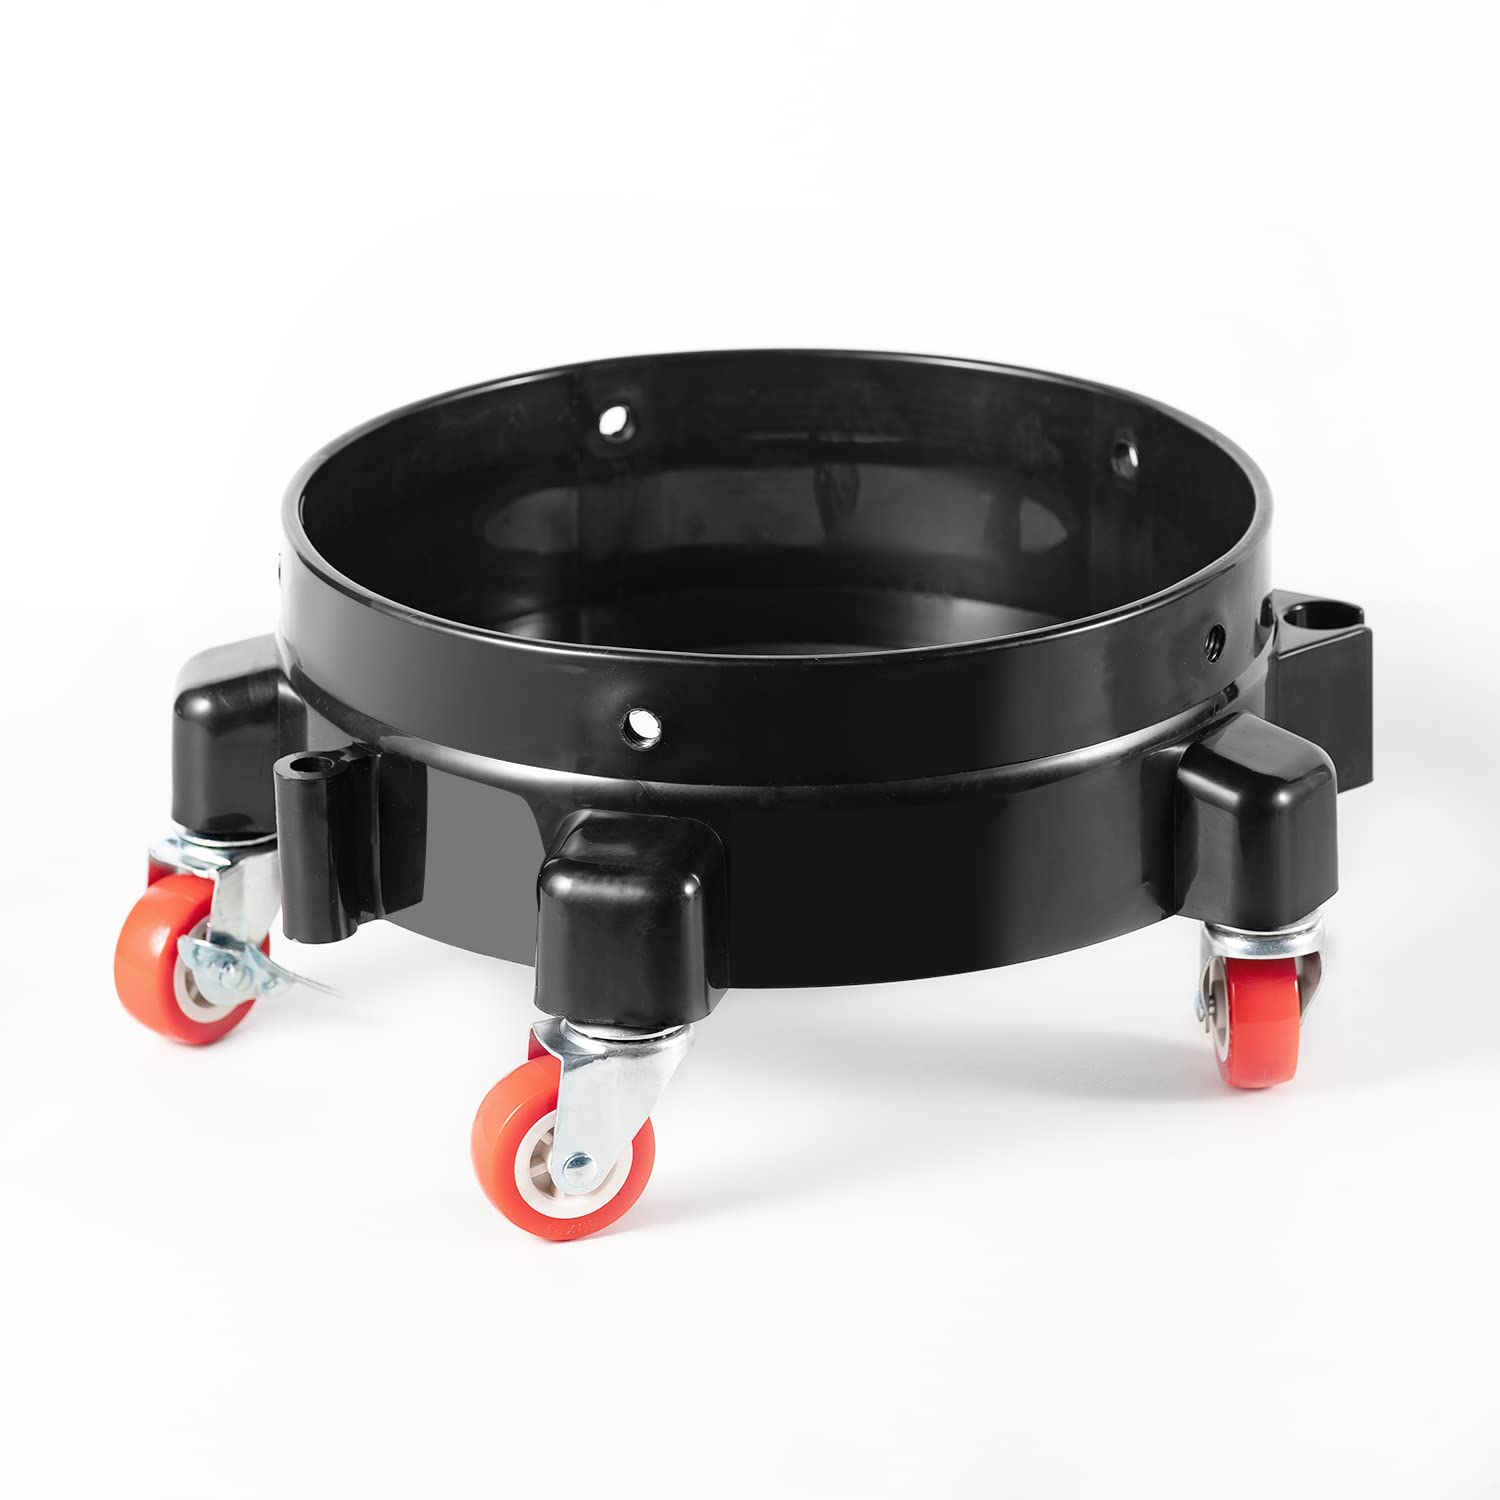 SGCB Pro 11.5 Inch Bucket Dolly, Removable Rolling Bucket Dolly Easy Push 5 Roll Swivel Casters to Move 360 Degree Turning for 5 Gallon Buckets Car Wash System Detailing Smoother Maneuvering, Black